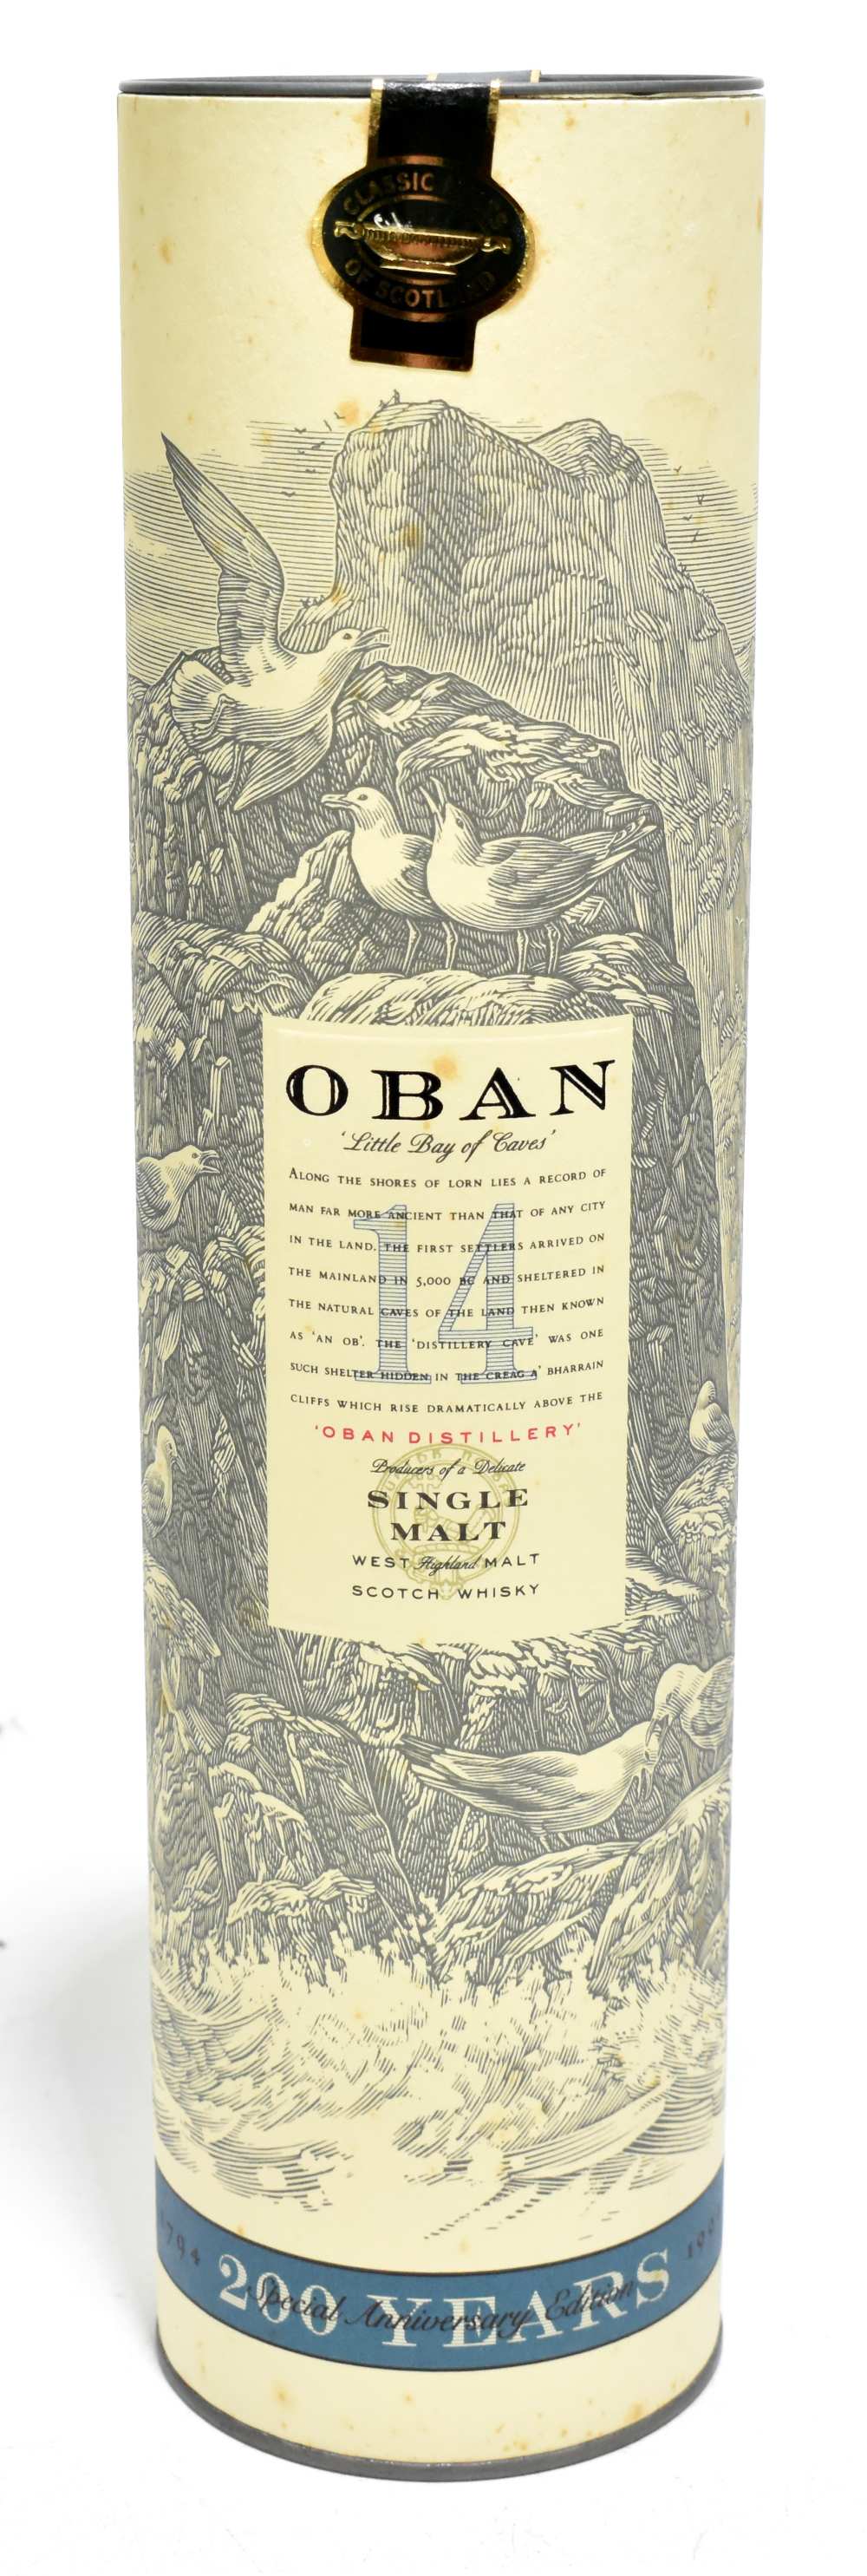 WHISKY; a single bottle of Oban Single Malt West Highland Scotch Whisky aged 14 years, special